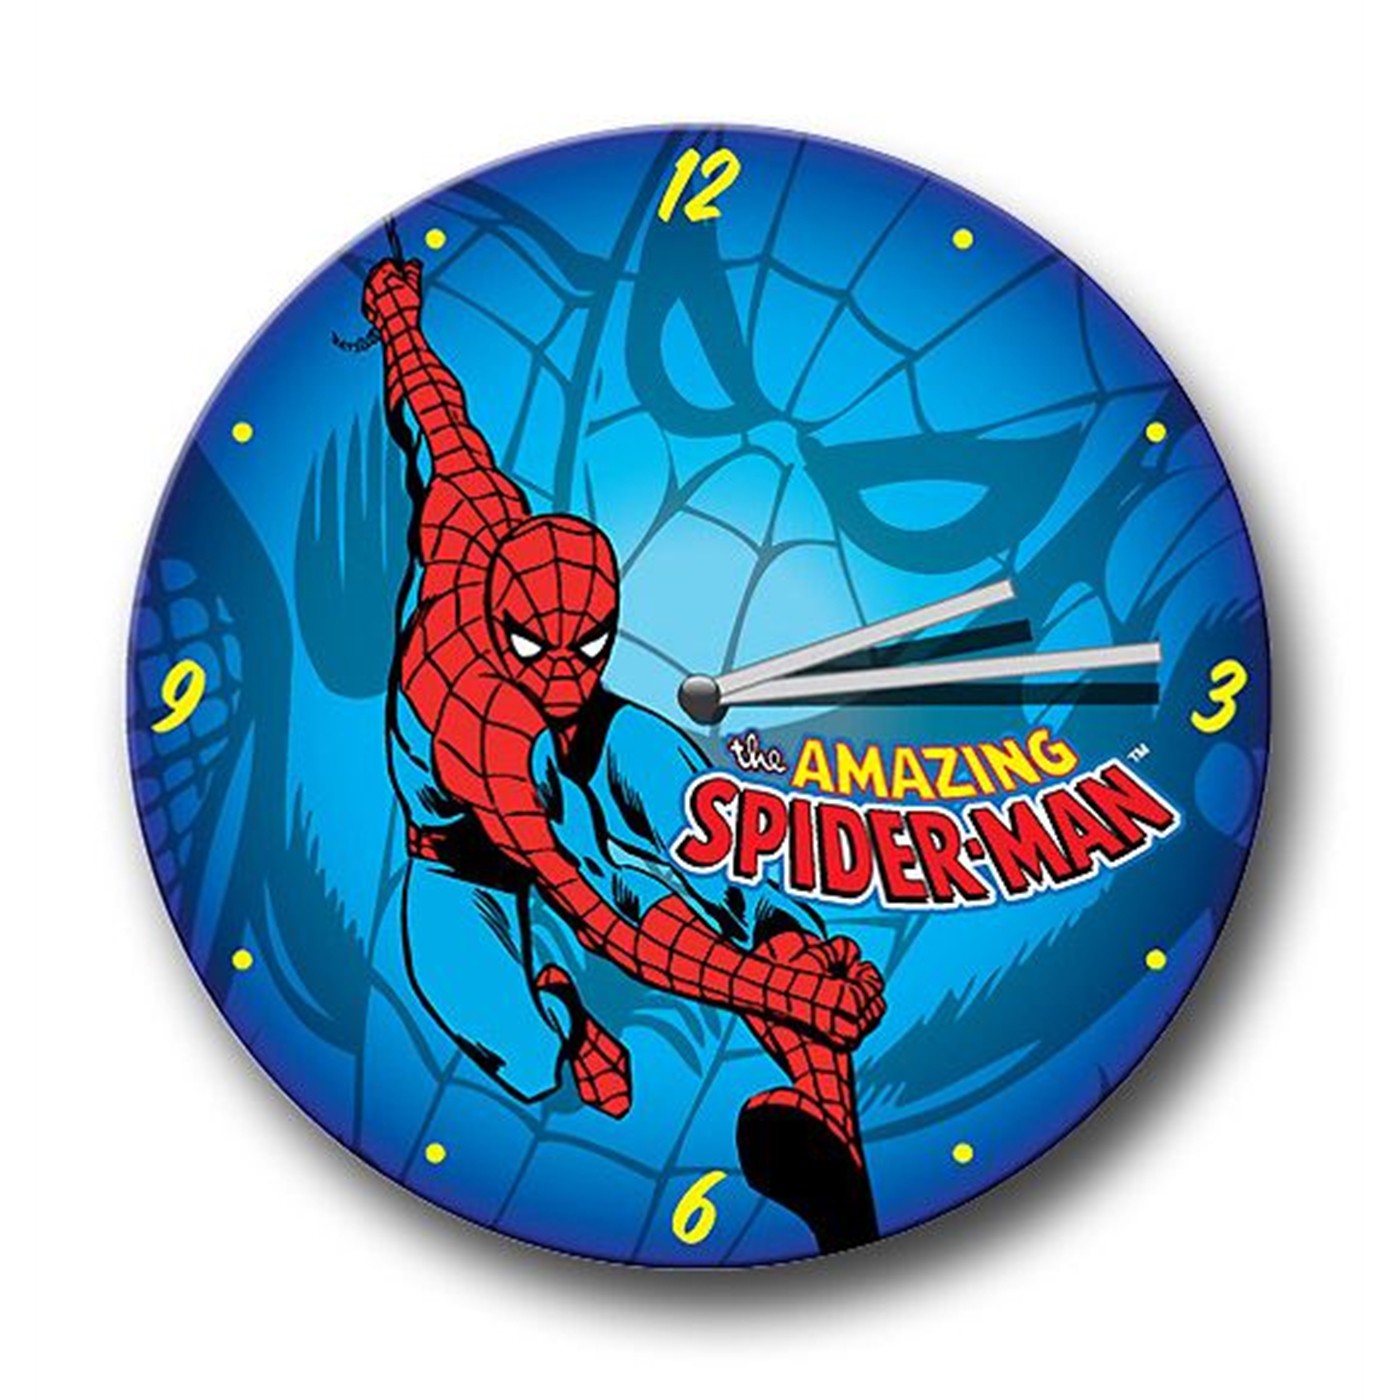 The Amazing Spider-Man Wood Wall Clock